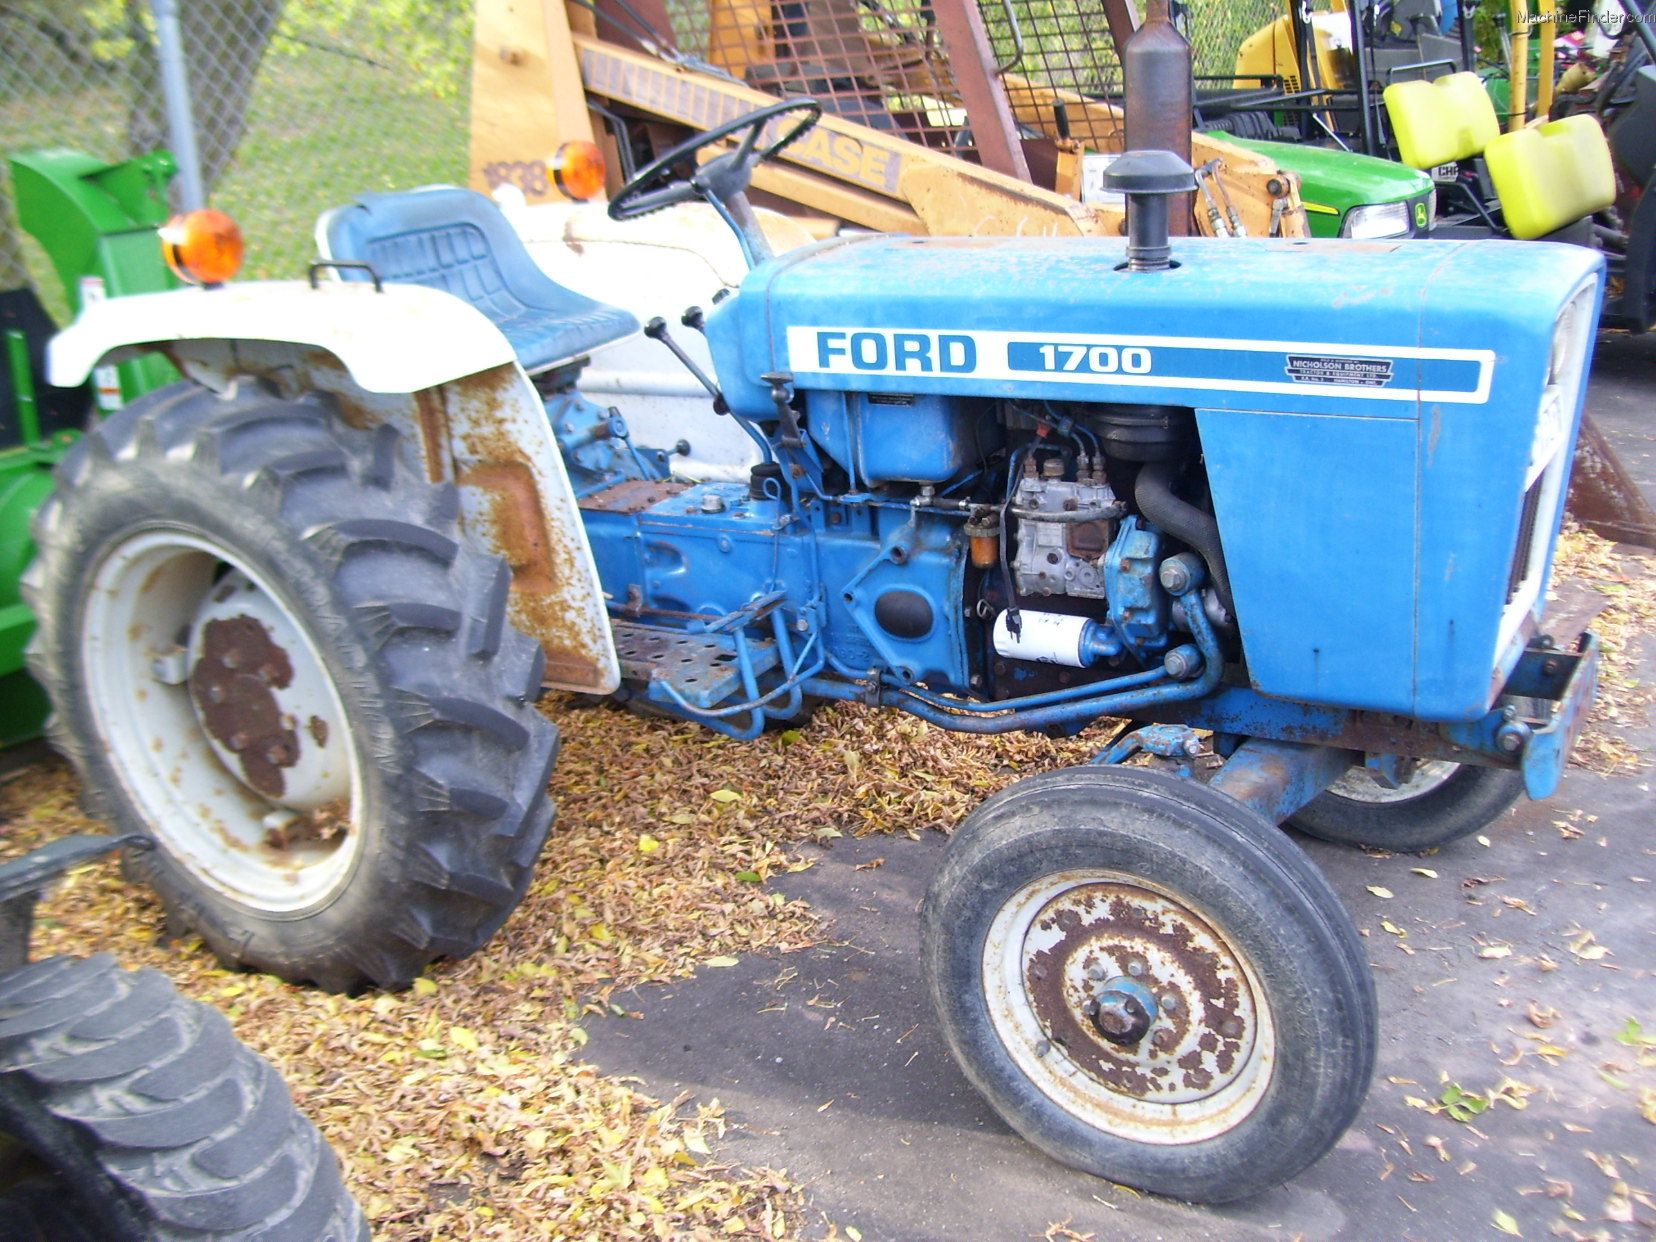 Ford 1700 compact tractor #4